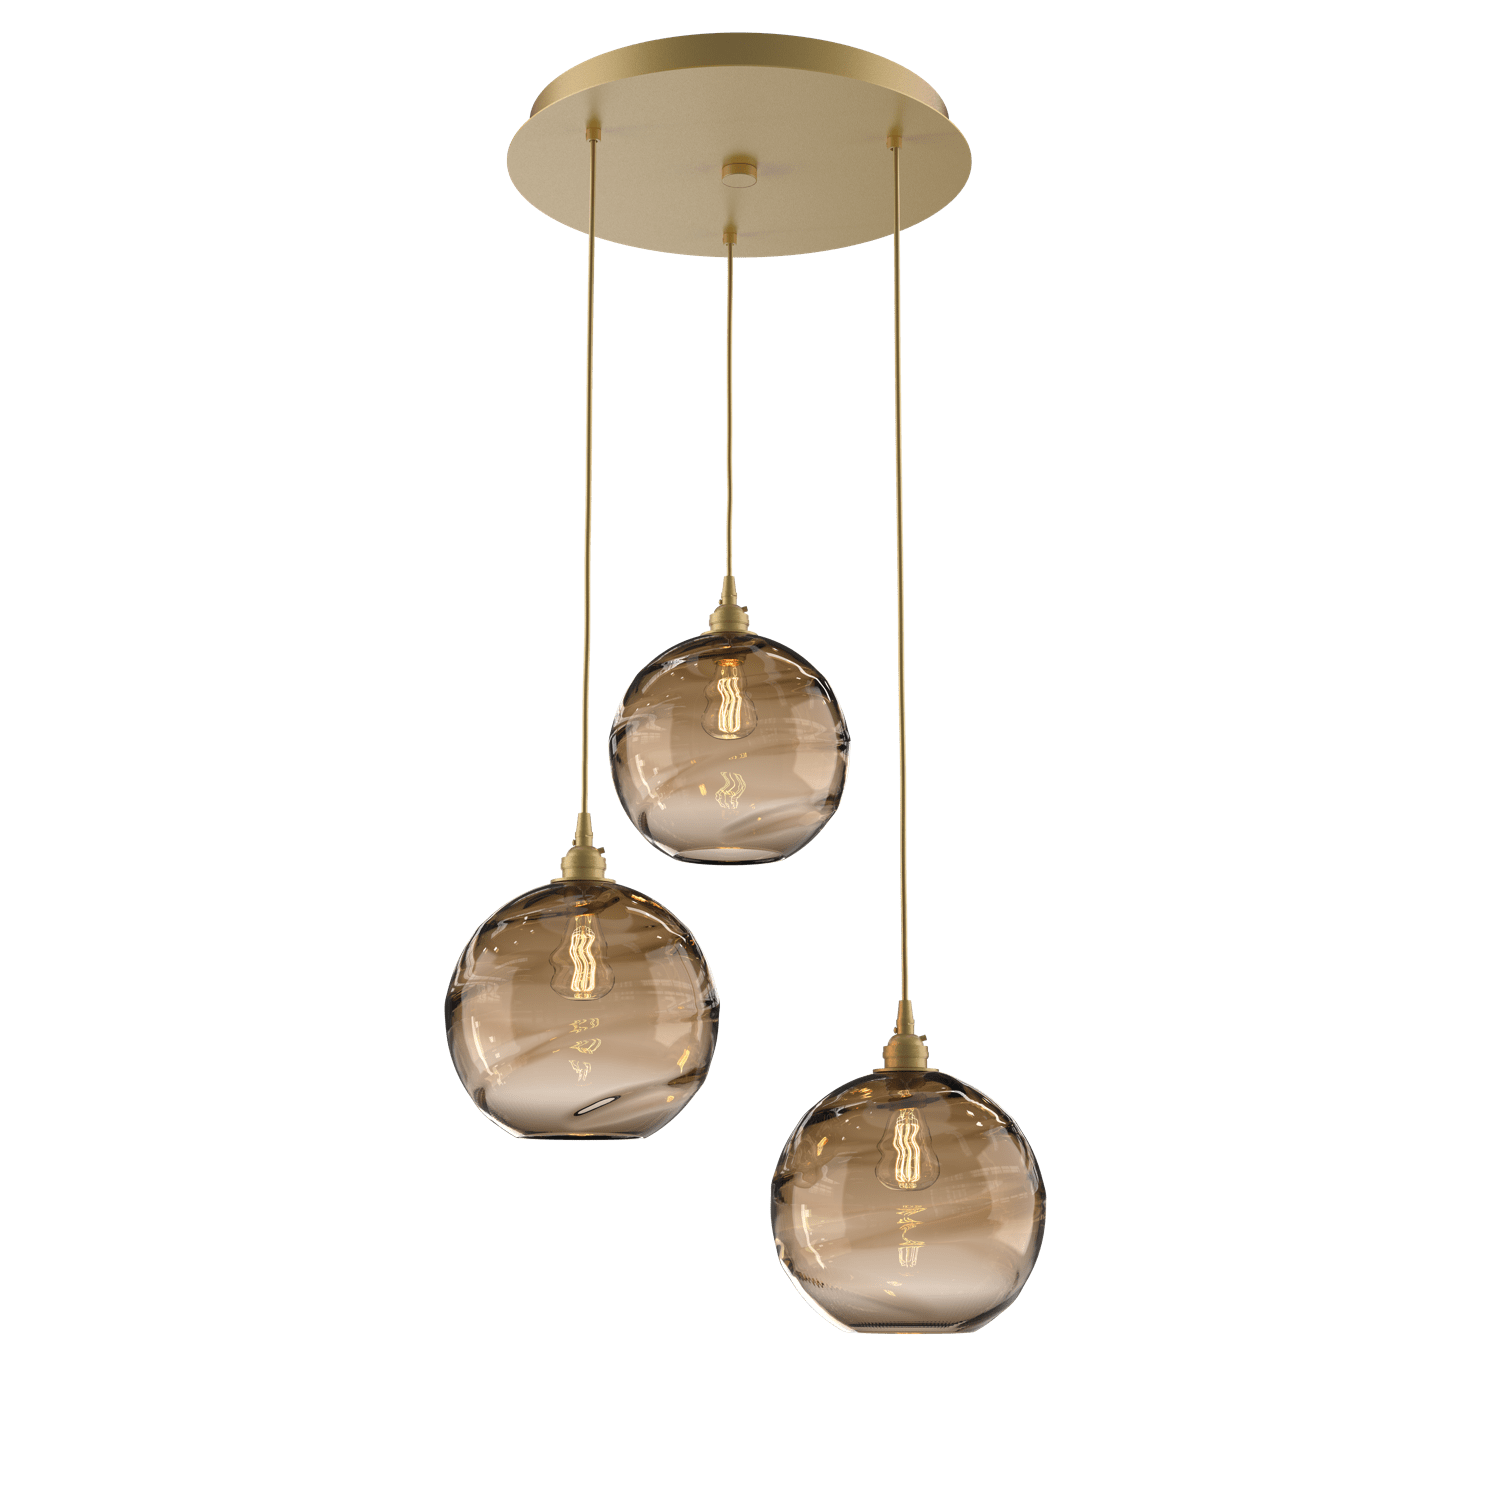 CHB0047-03-GB-OB-Hammerton-Studio-Optic-Blown-Glass-Terra-3-light-round-pendant-chandelier-with-gilded-brass-finish-and-optic-bronze-blown-glass-shades-and-incandescent-lamping